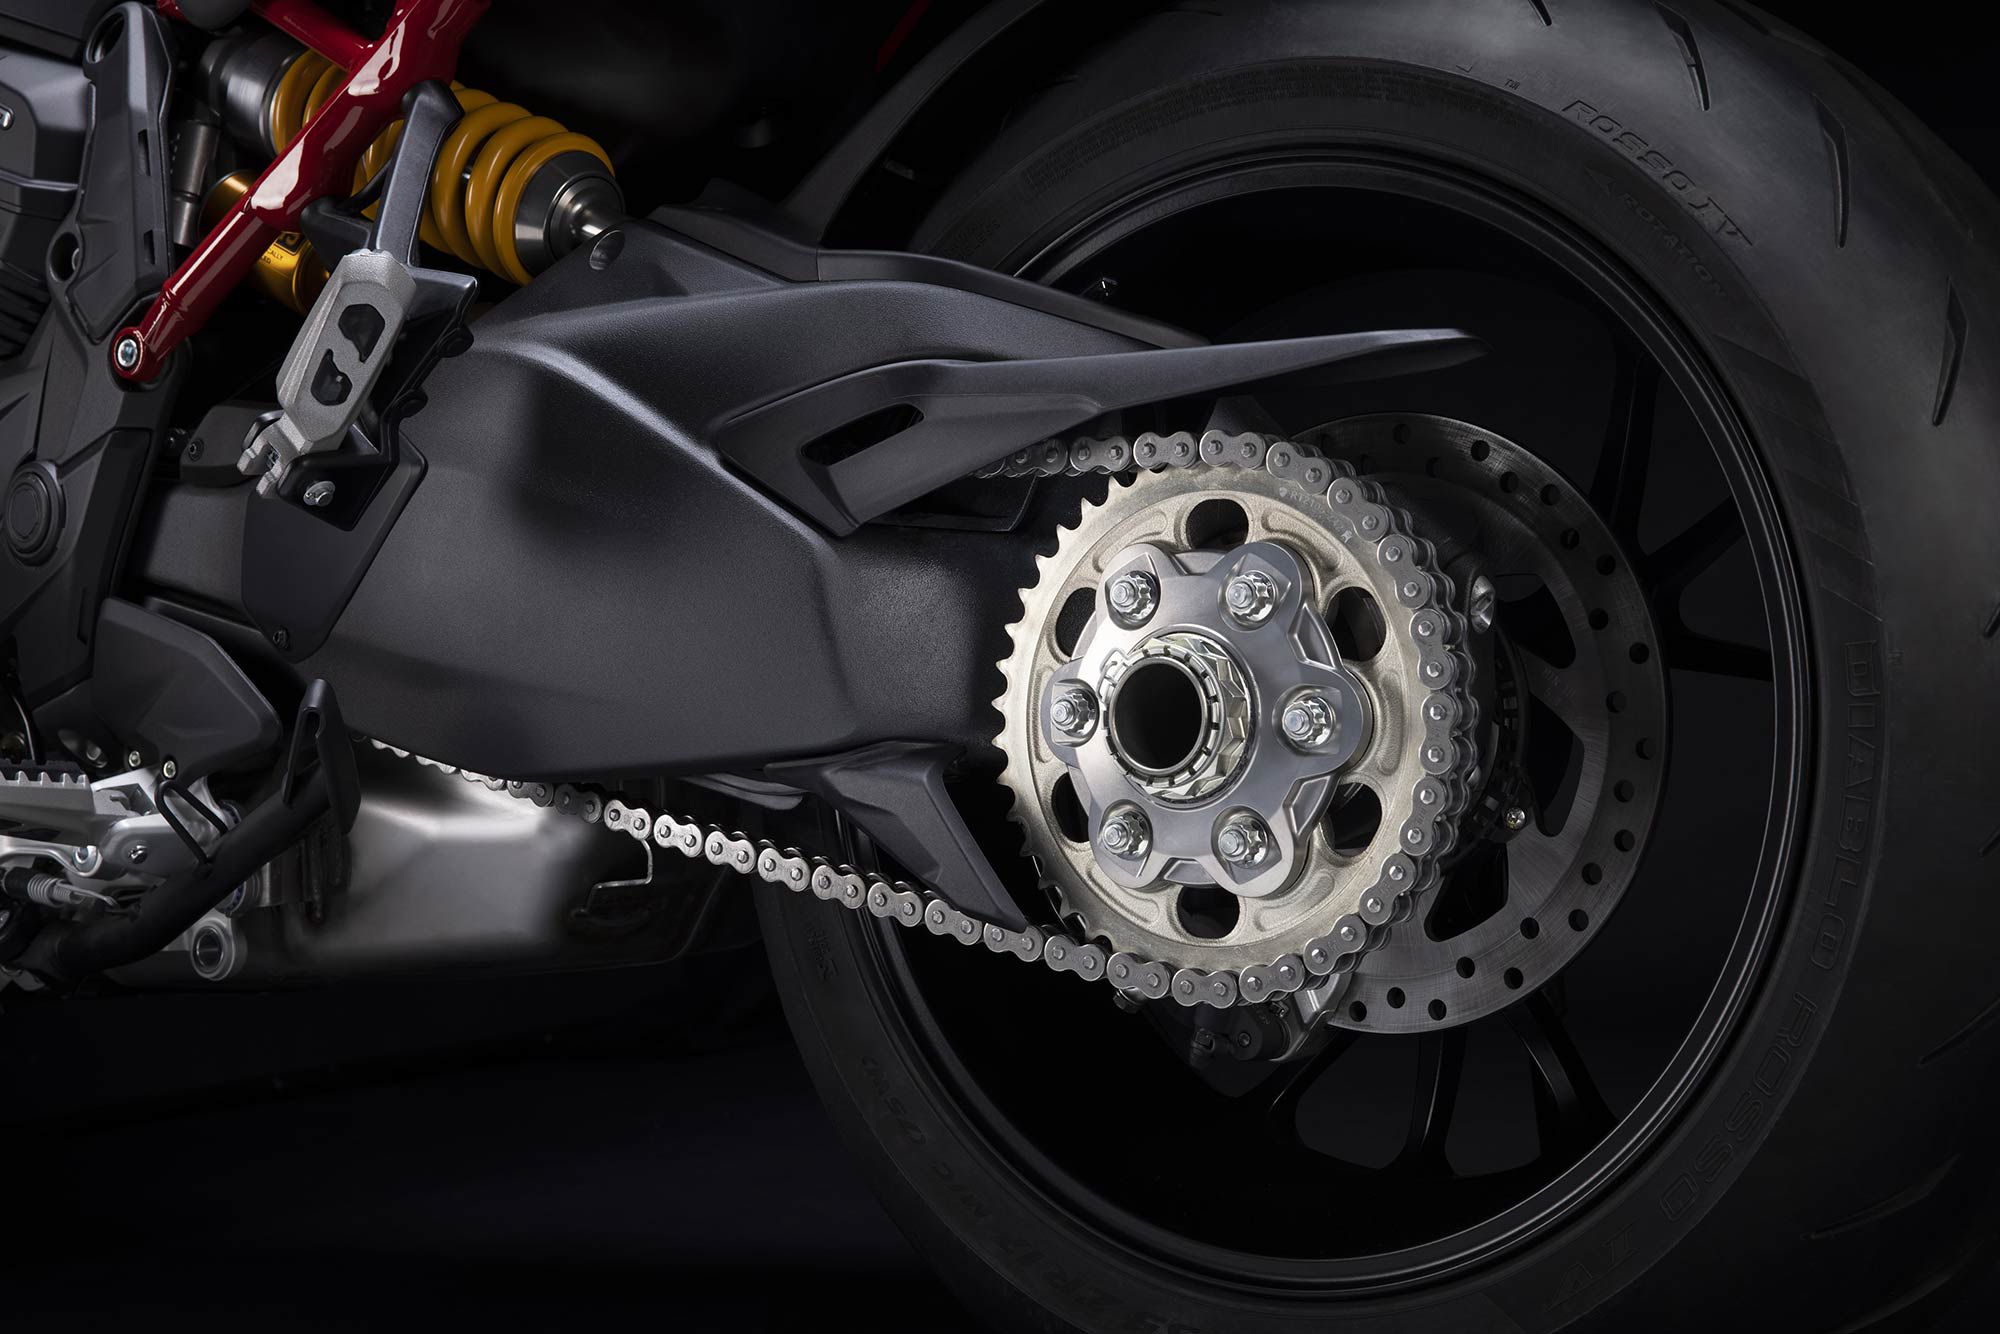 A single-sided swingarm is another sporty touch.